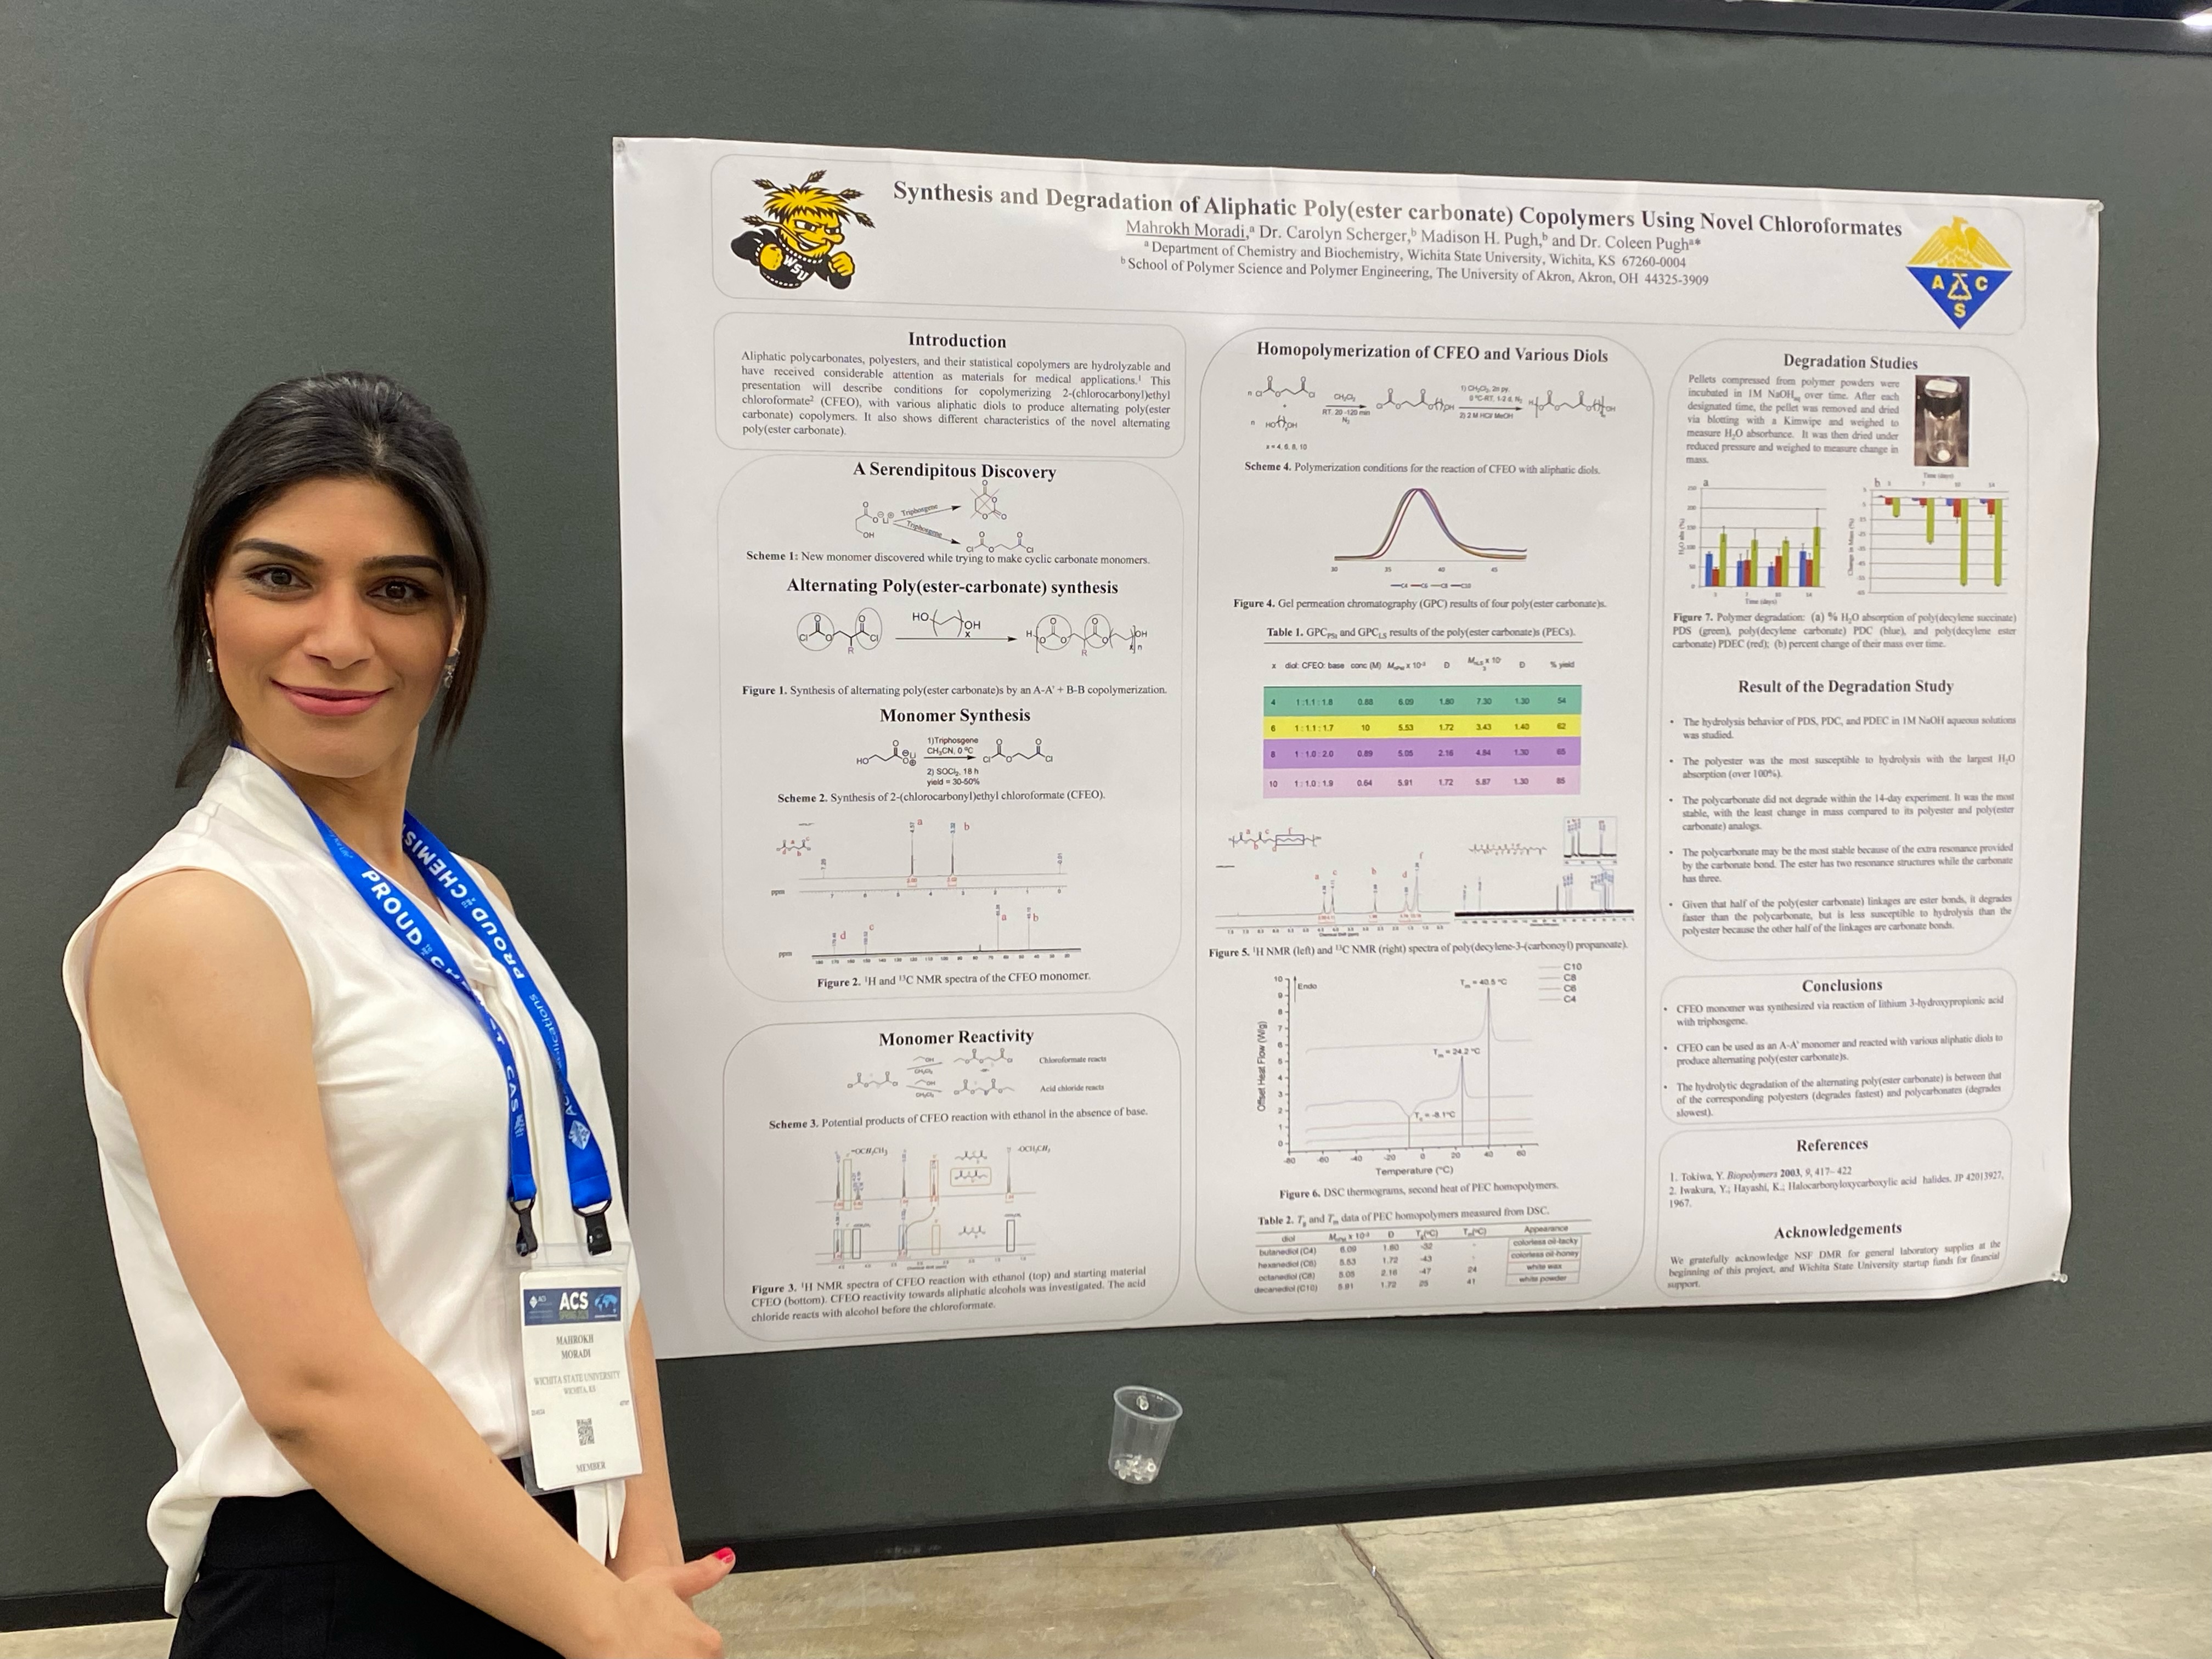 Graduate student posing in front of poster at a conference